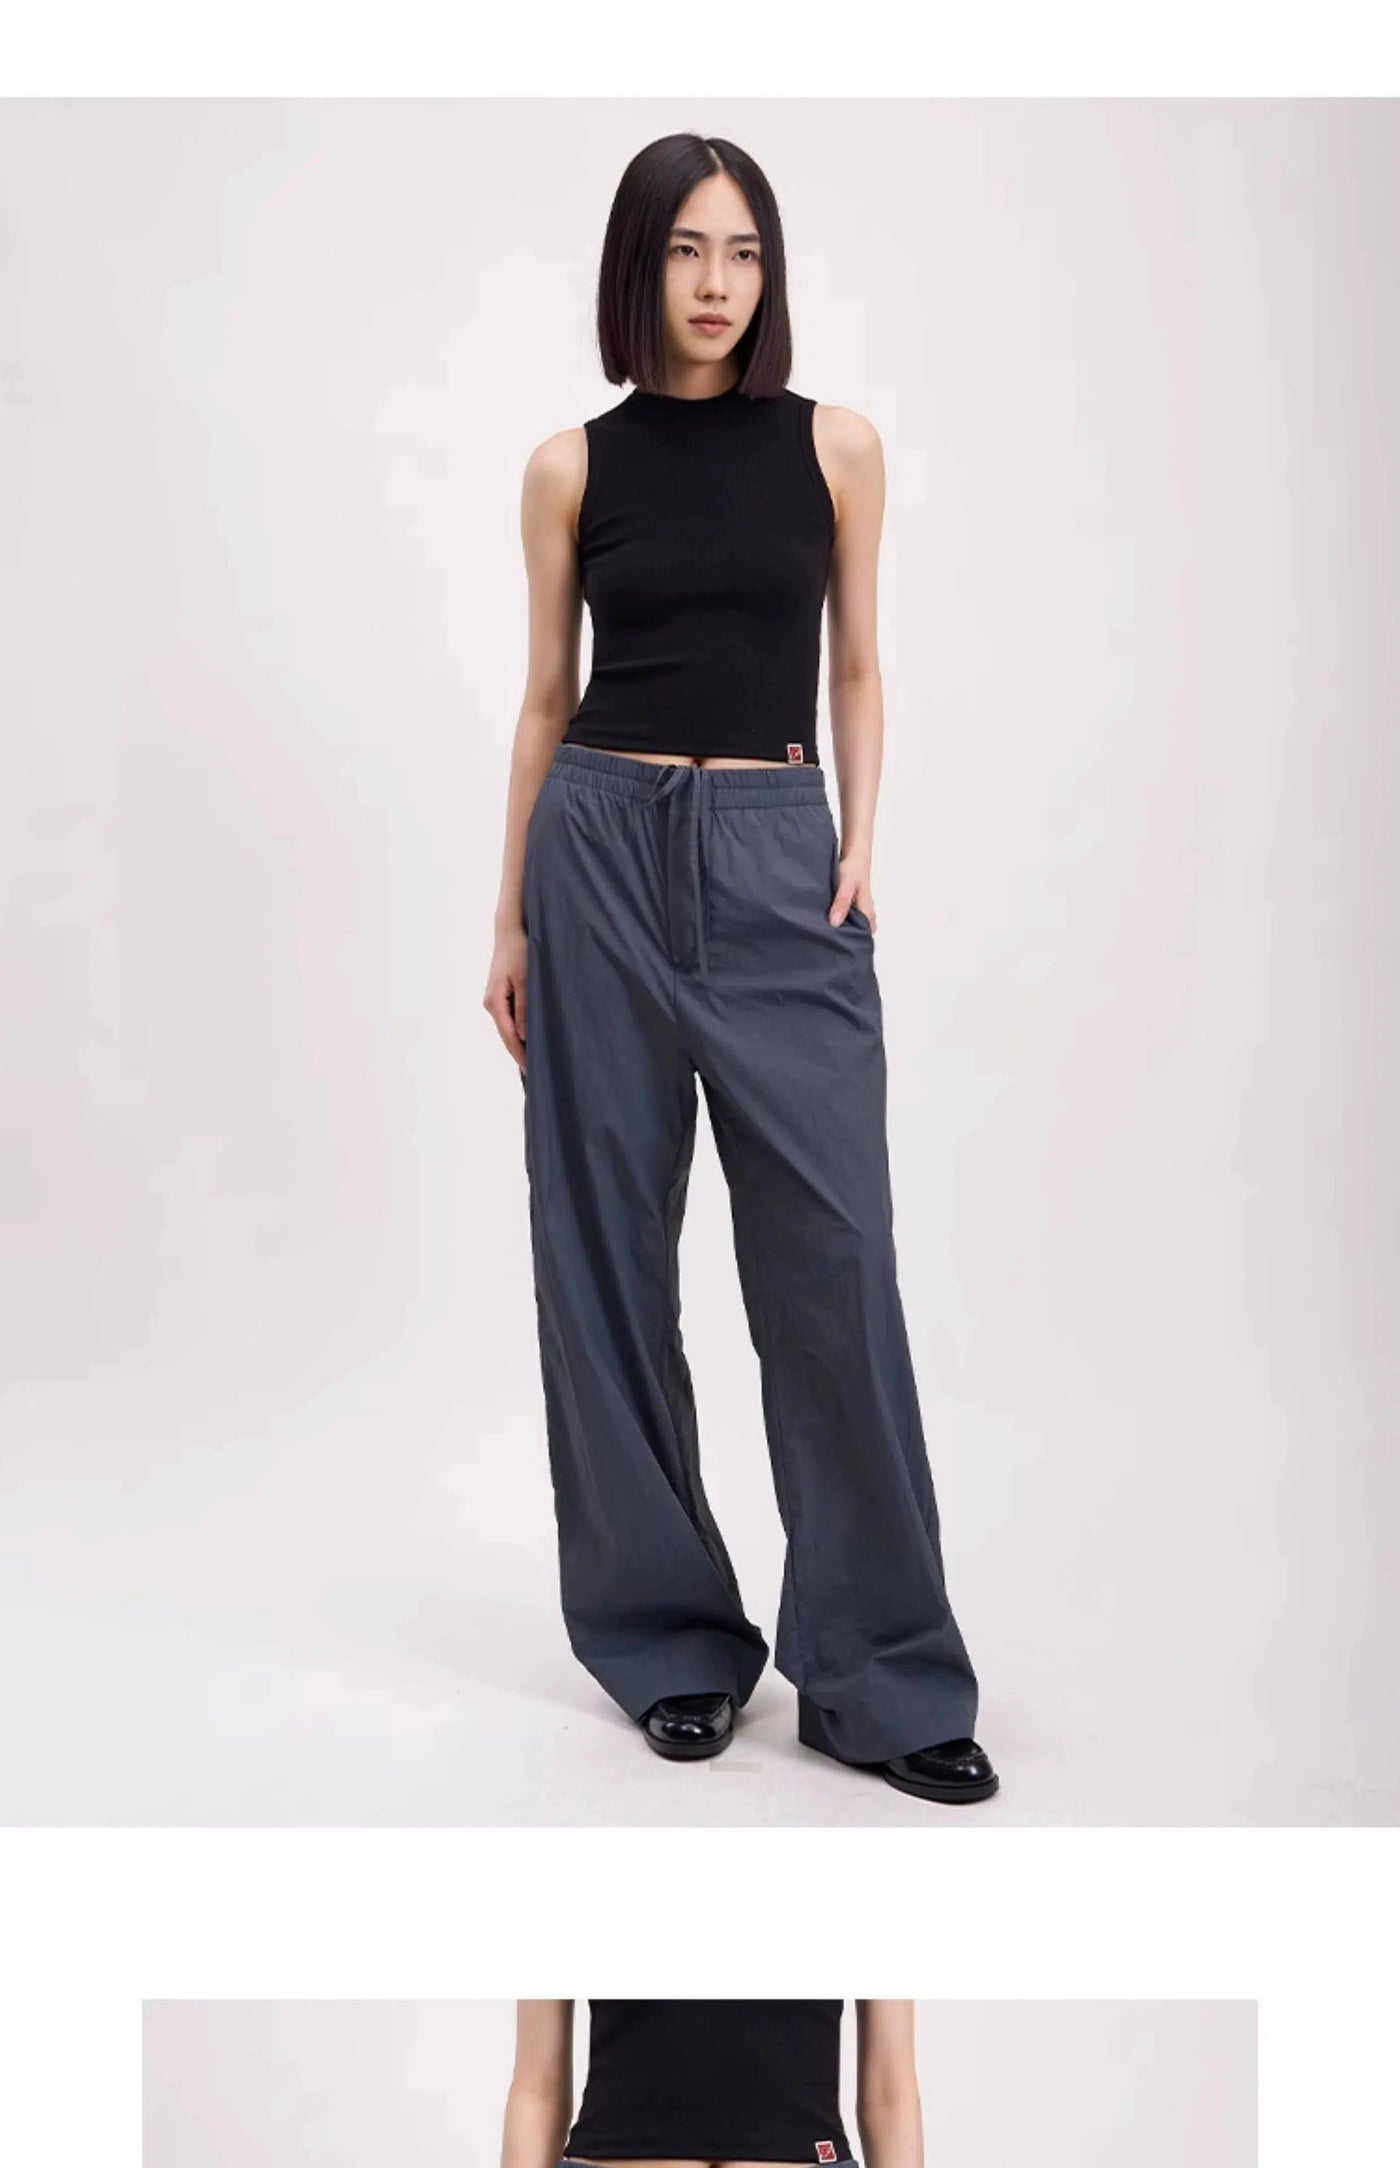 Light Elastic Waist Track Pants Korean Street Fashion Pants By Opicloth Shop Online at OH Vault